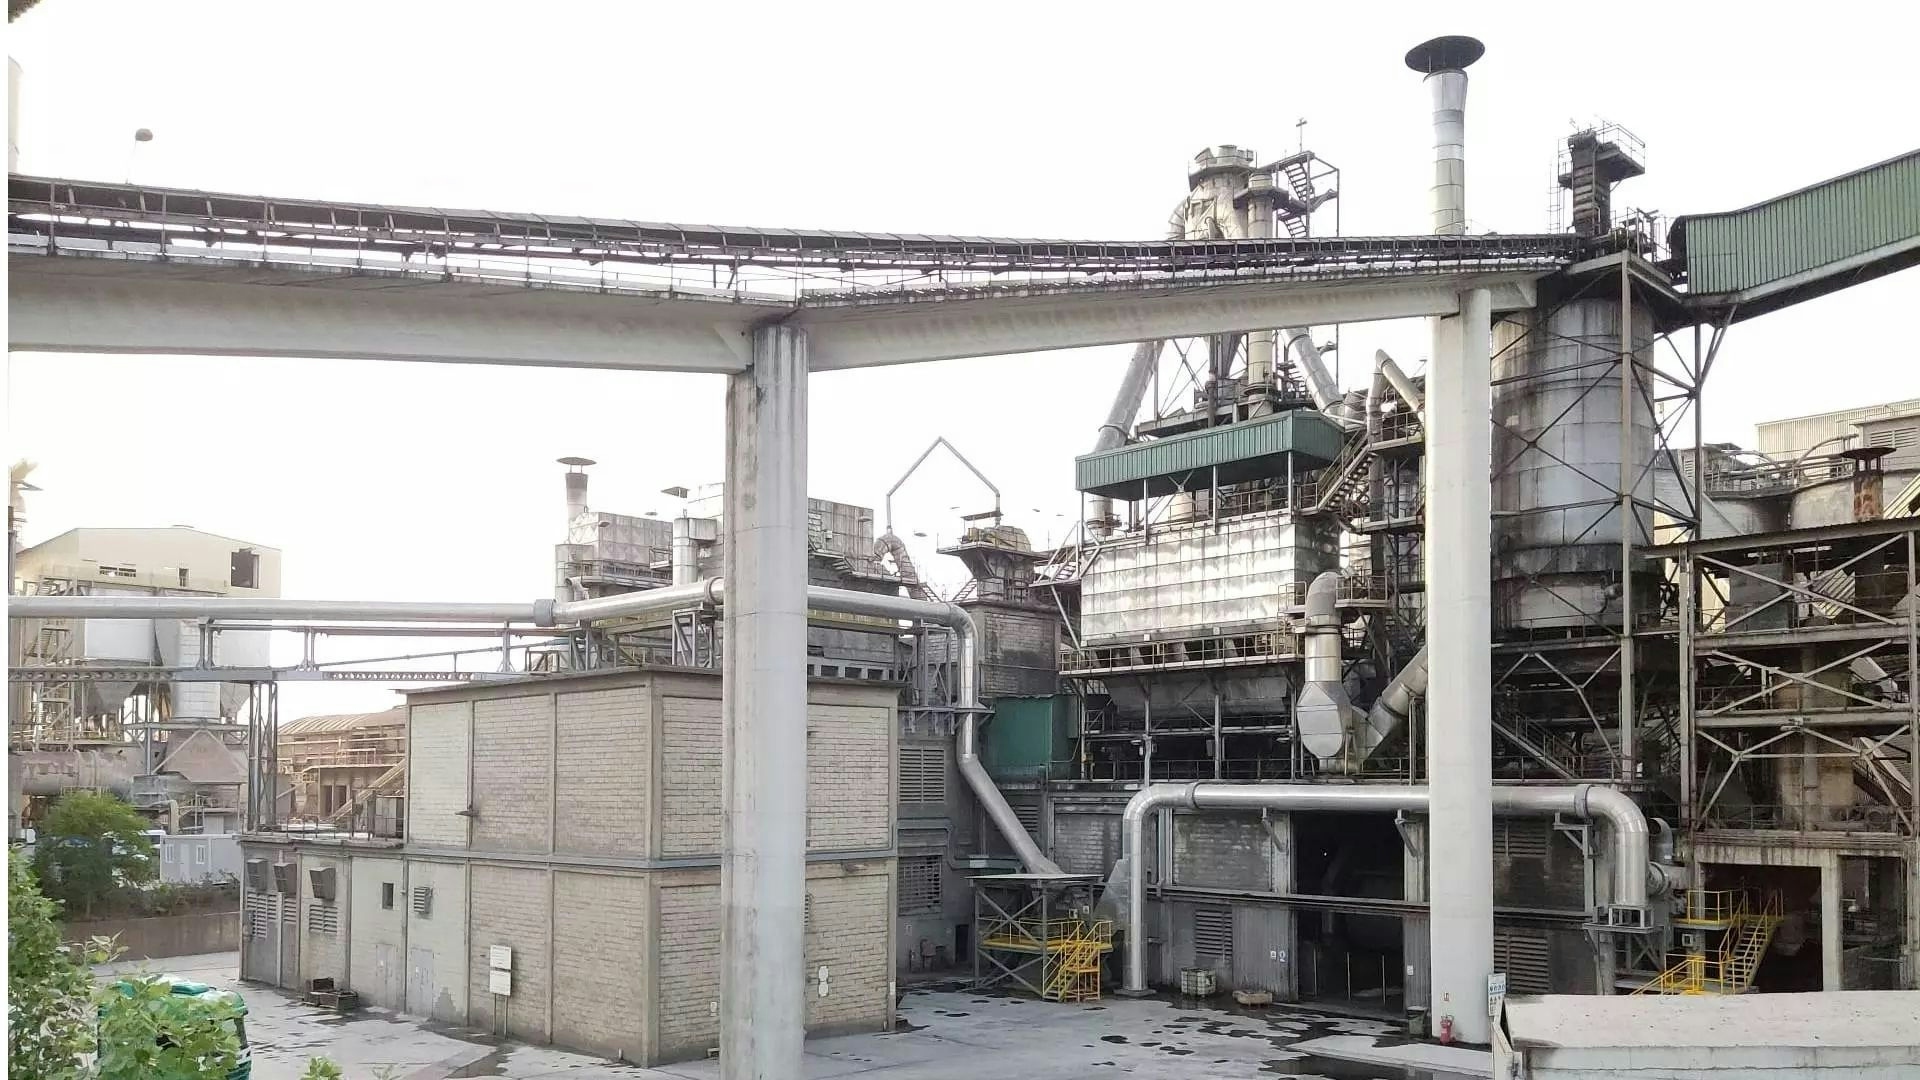 Cementos Molins cuts emissions with waste heat project